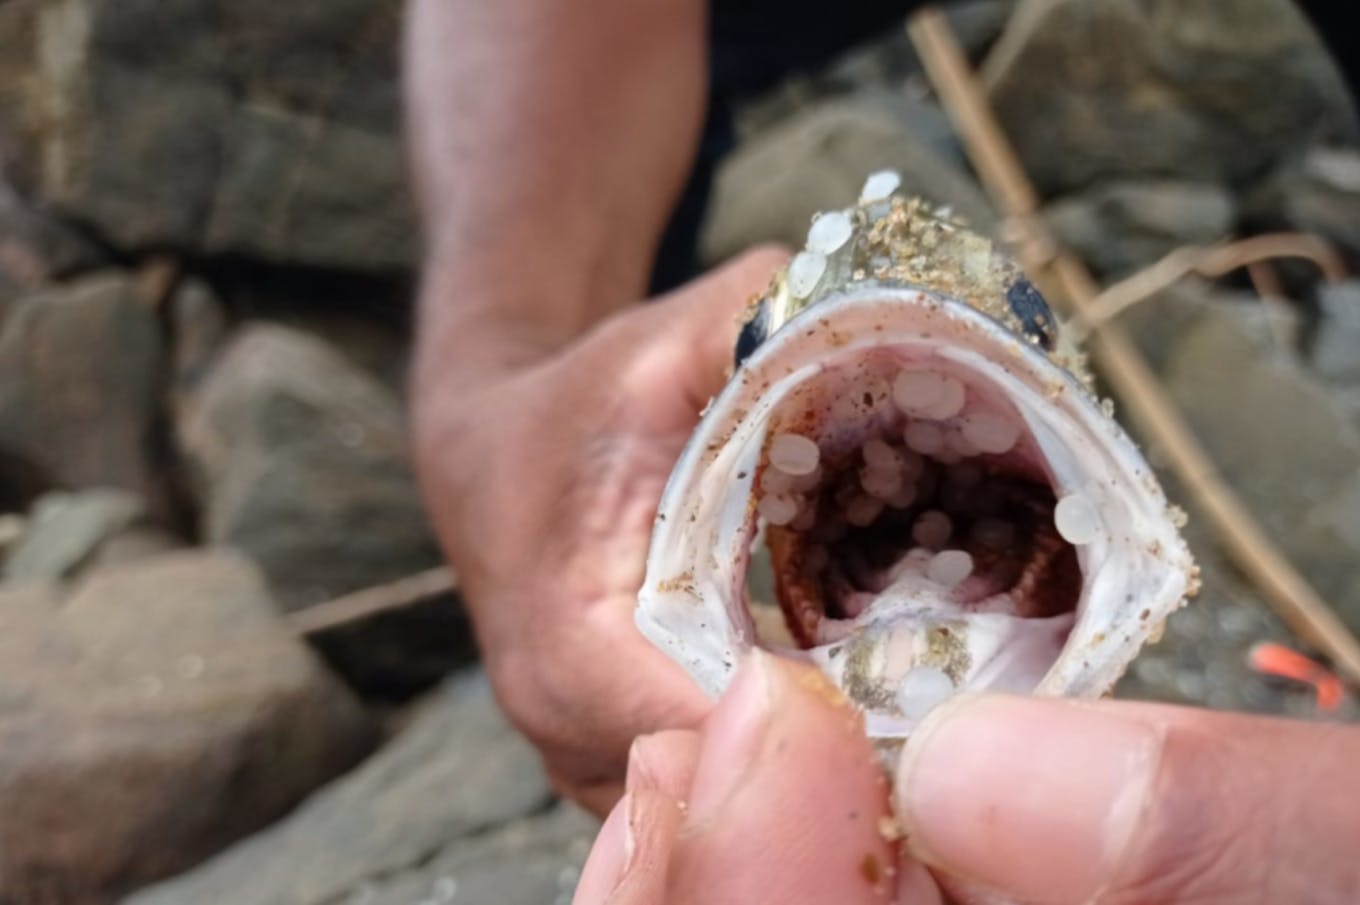 A fish contain plastic nurdles in its mouth. Image: Sri Lanka Marine Environment Protection Authority